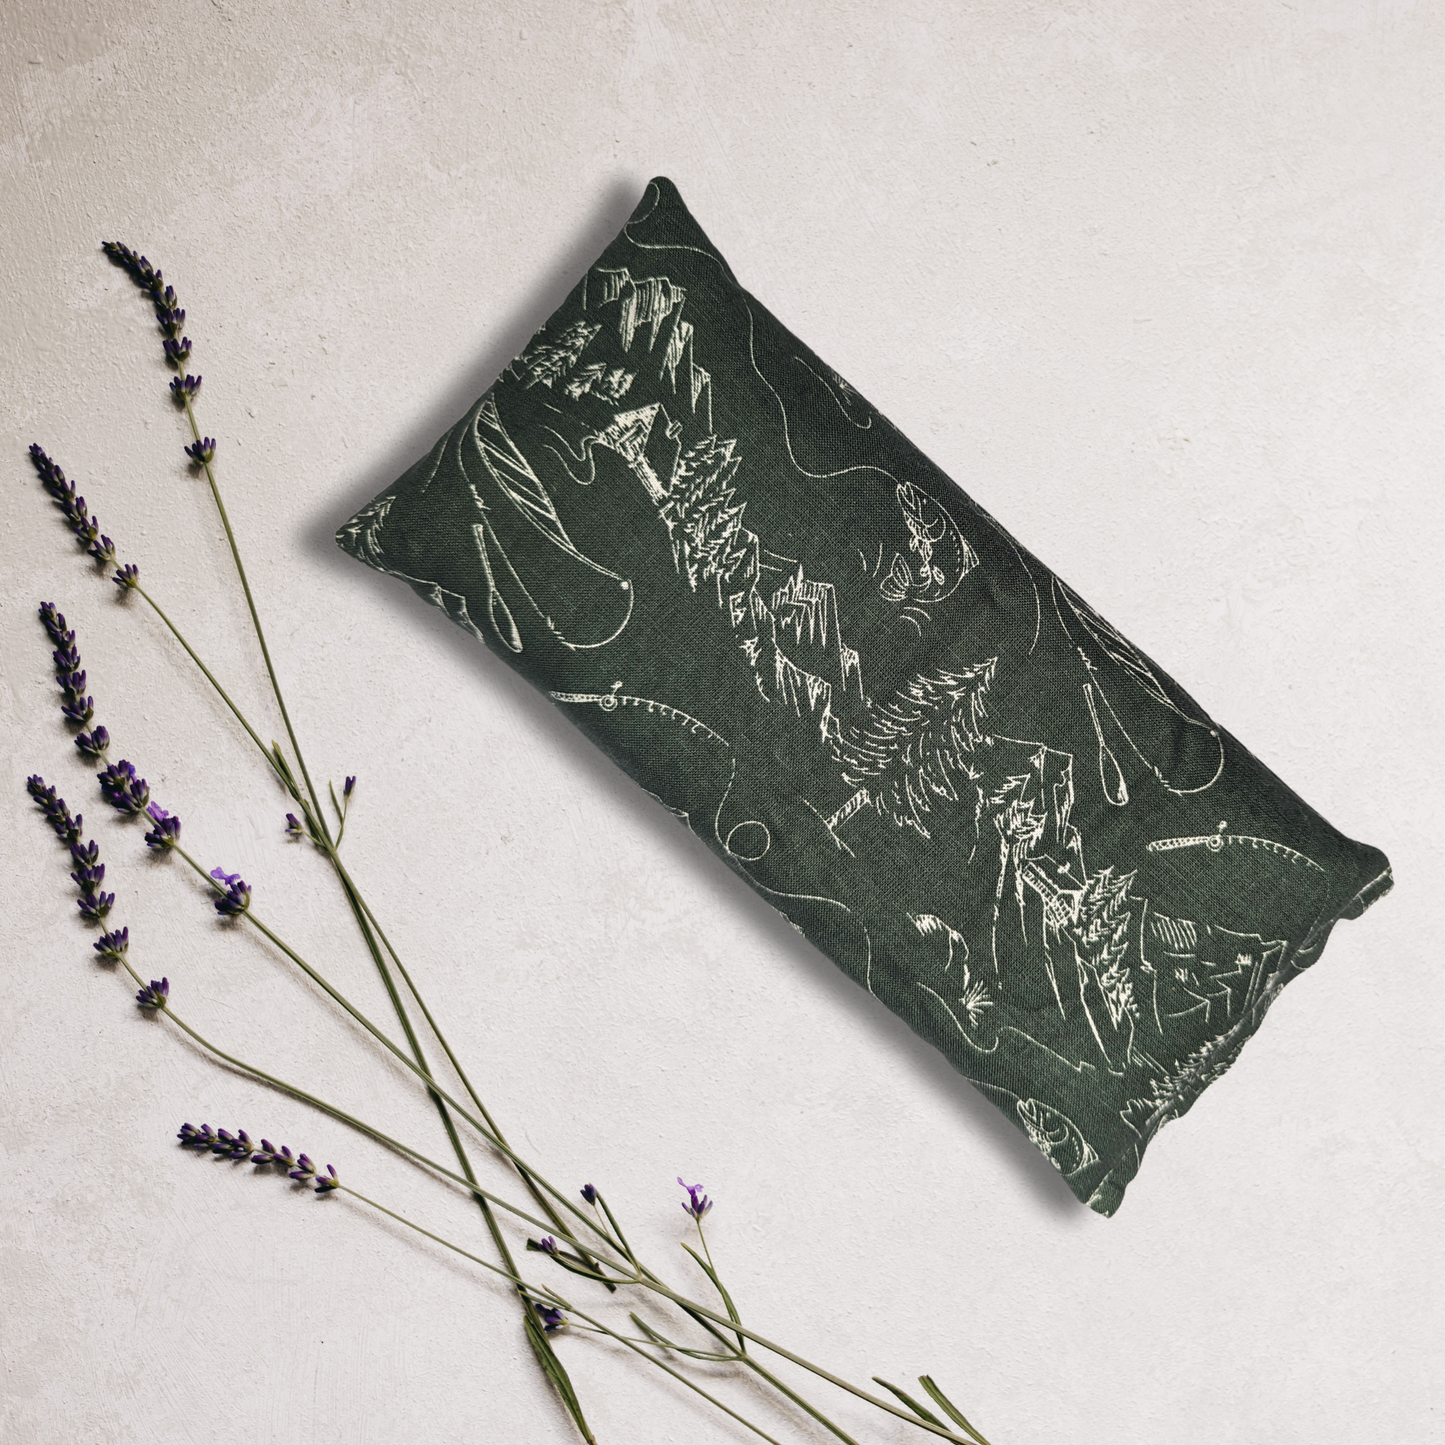 Handcrafted Lavender & Organic Wheat Berry Eye Pillows